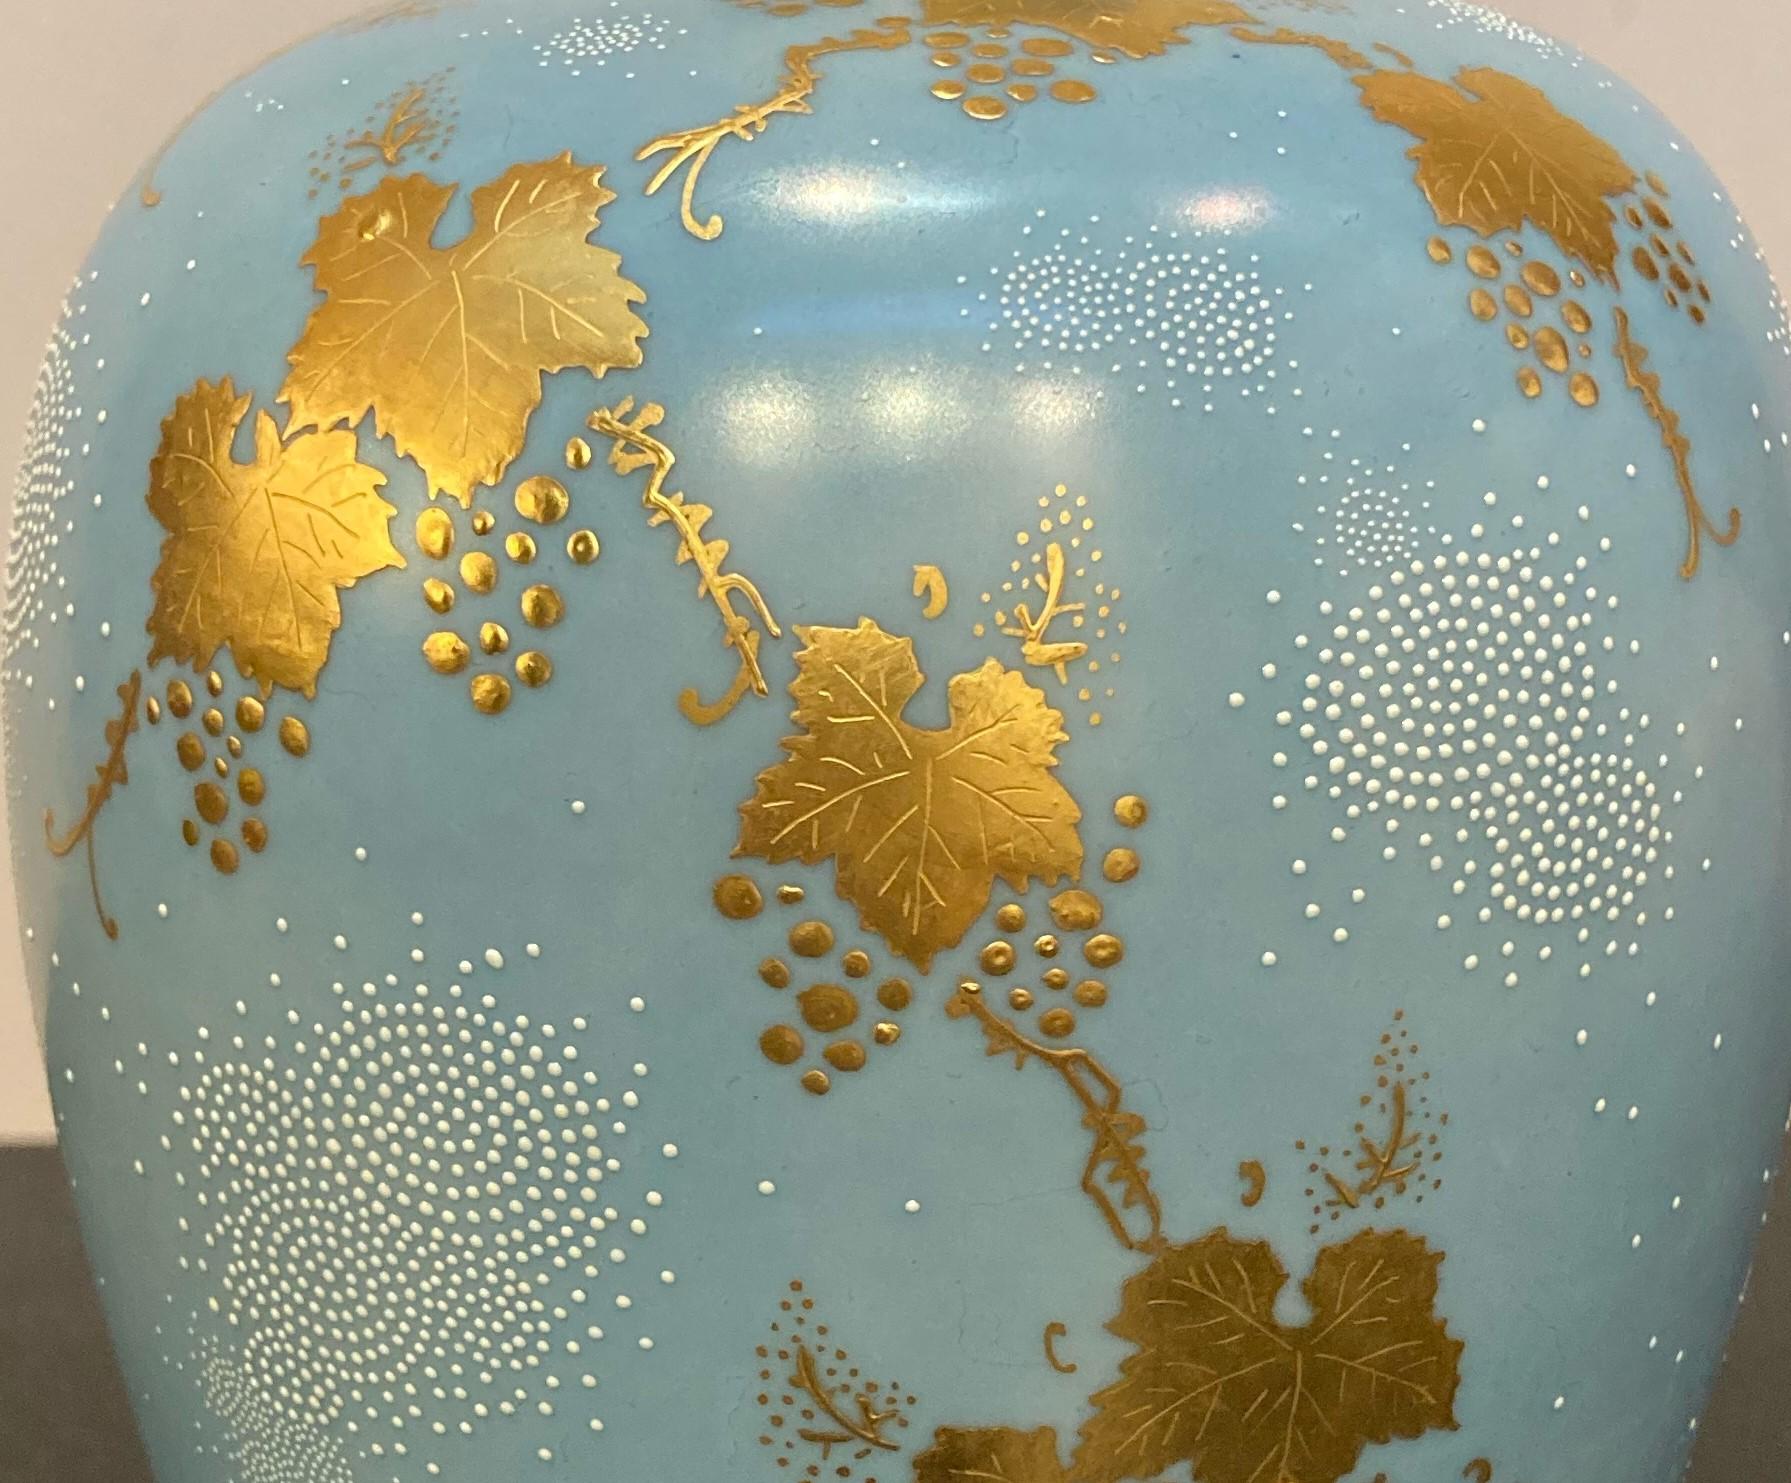 Exquisite Japanese contemporary collectible decorative porcelain vase, a stunning masterpiece by a celebrated award-winning third-generation master porcelain artist of the Kutani region of Japan featuring grape vines rendered in pure gold in chibu